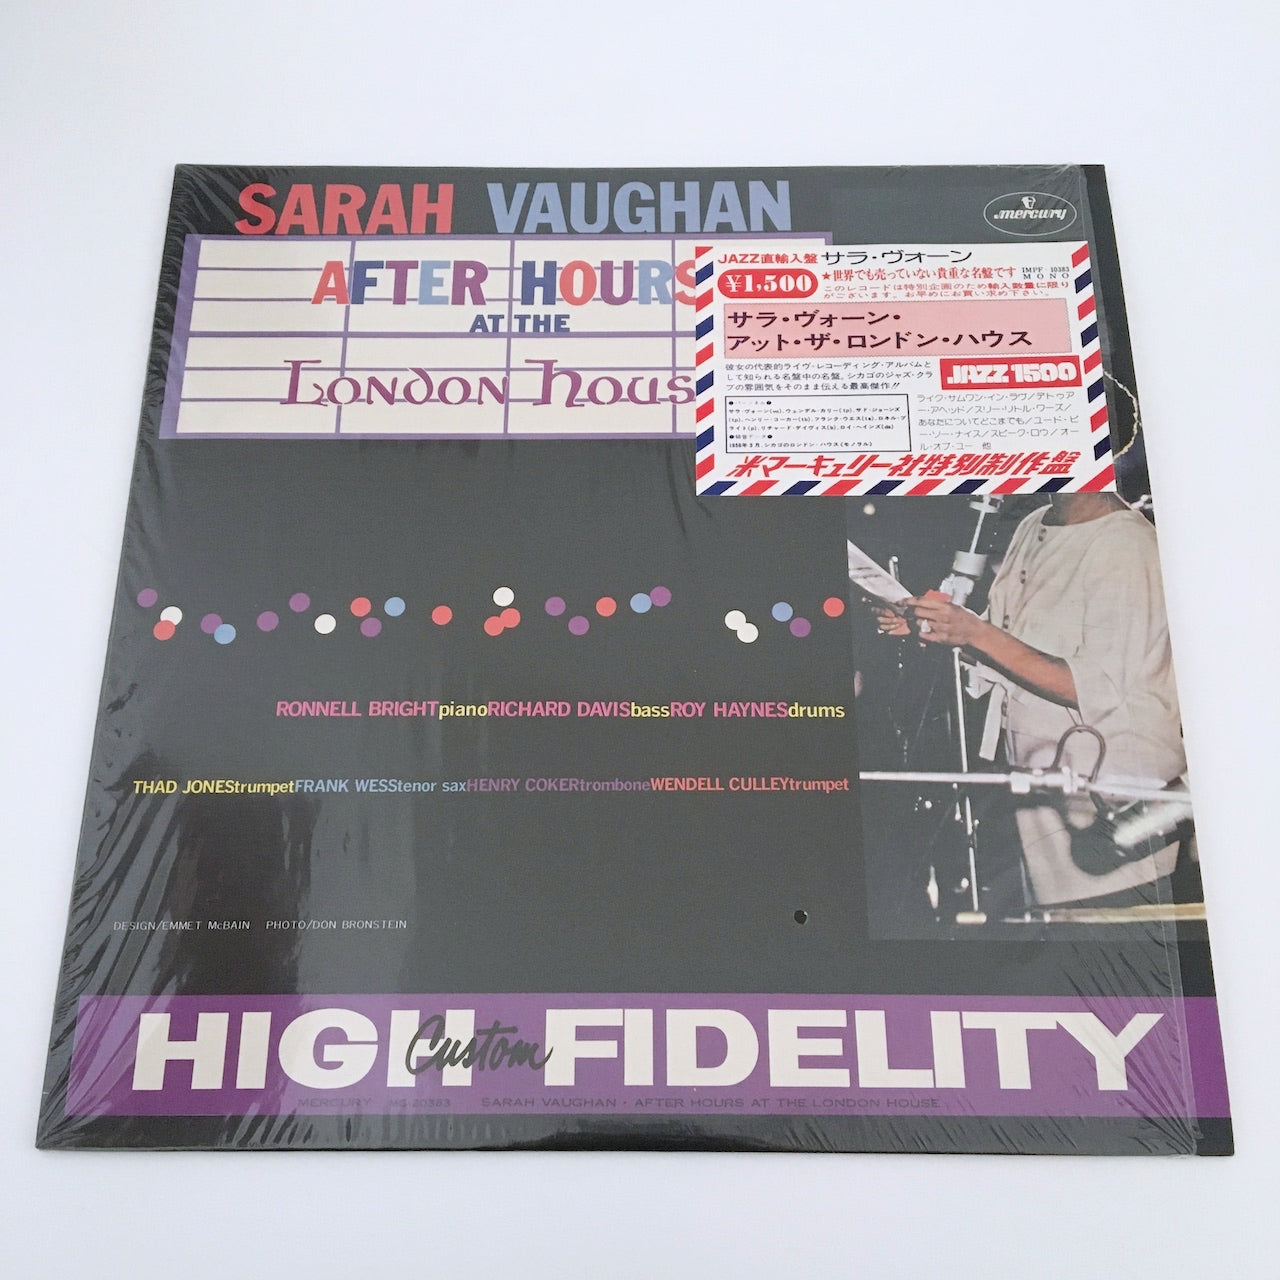 LP/ SARAH VAUGHAN / AFTER HOURS AT THE LONDON HOUSE / US盤 直輸入 ライナー 赤ラベル MERCURY MG-20383